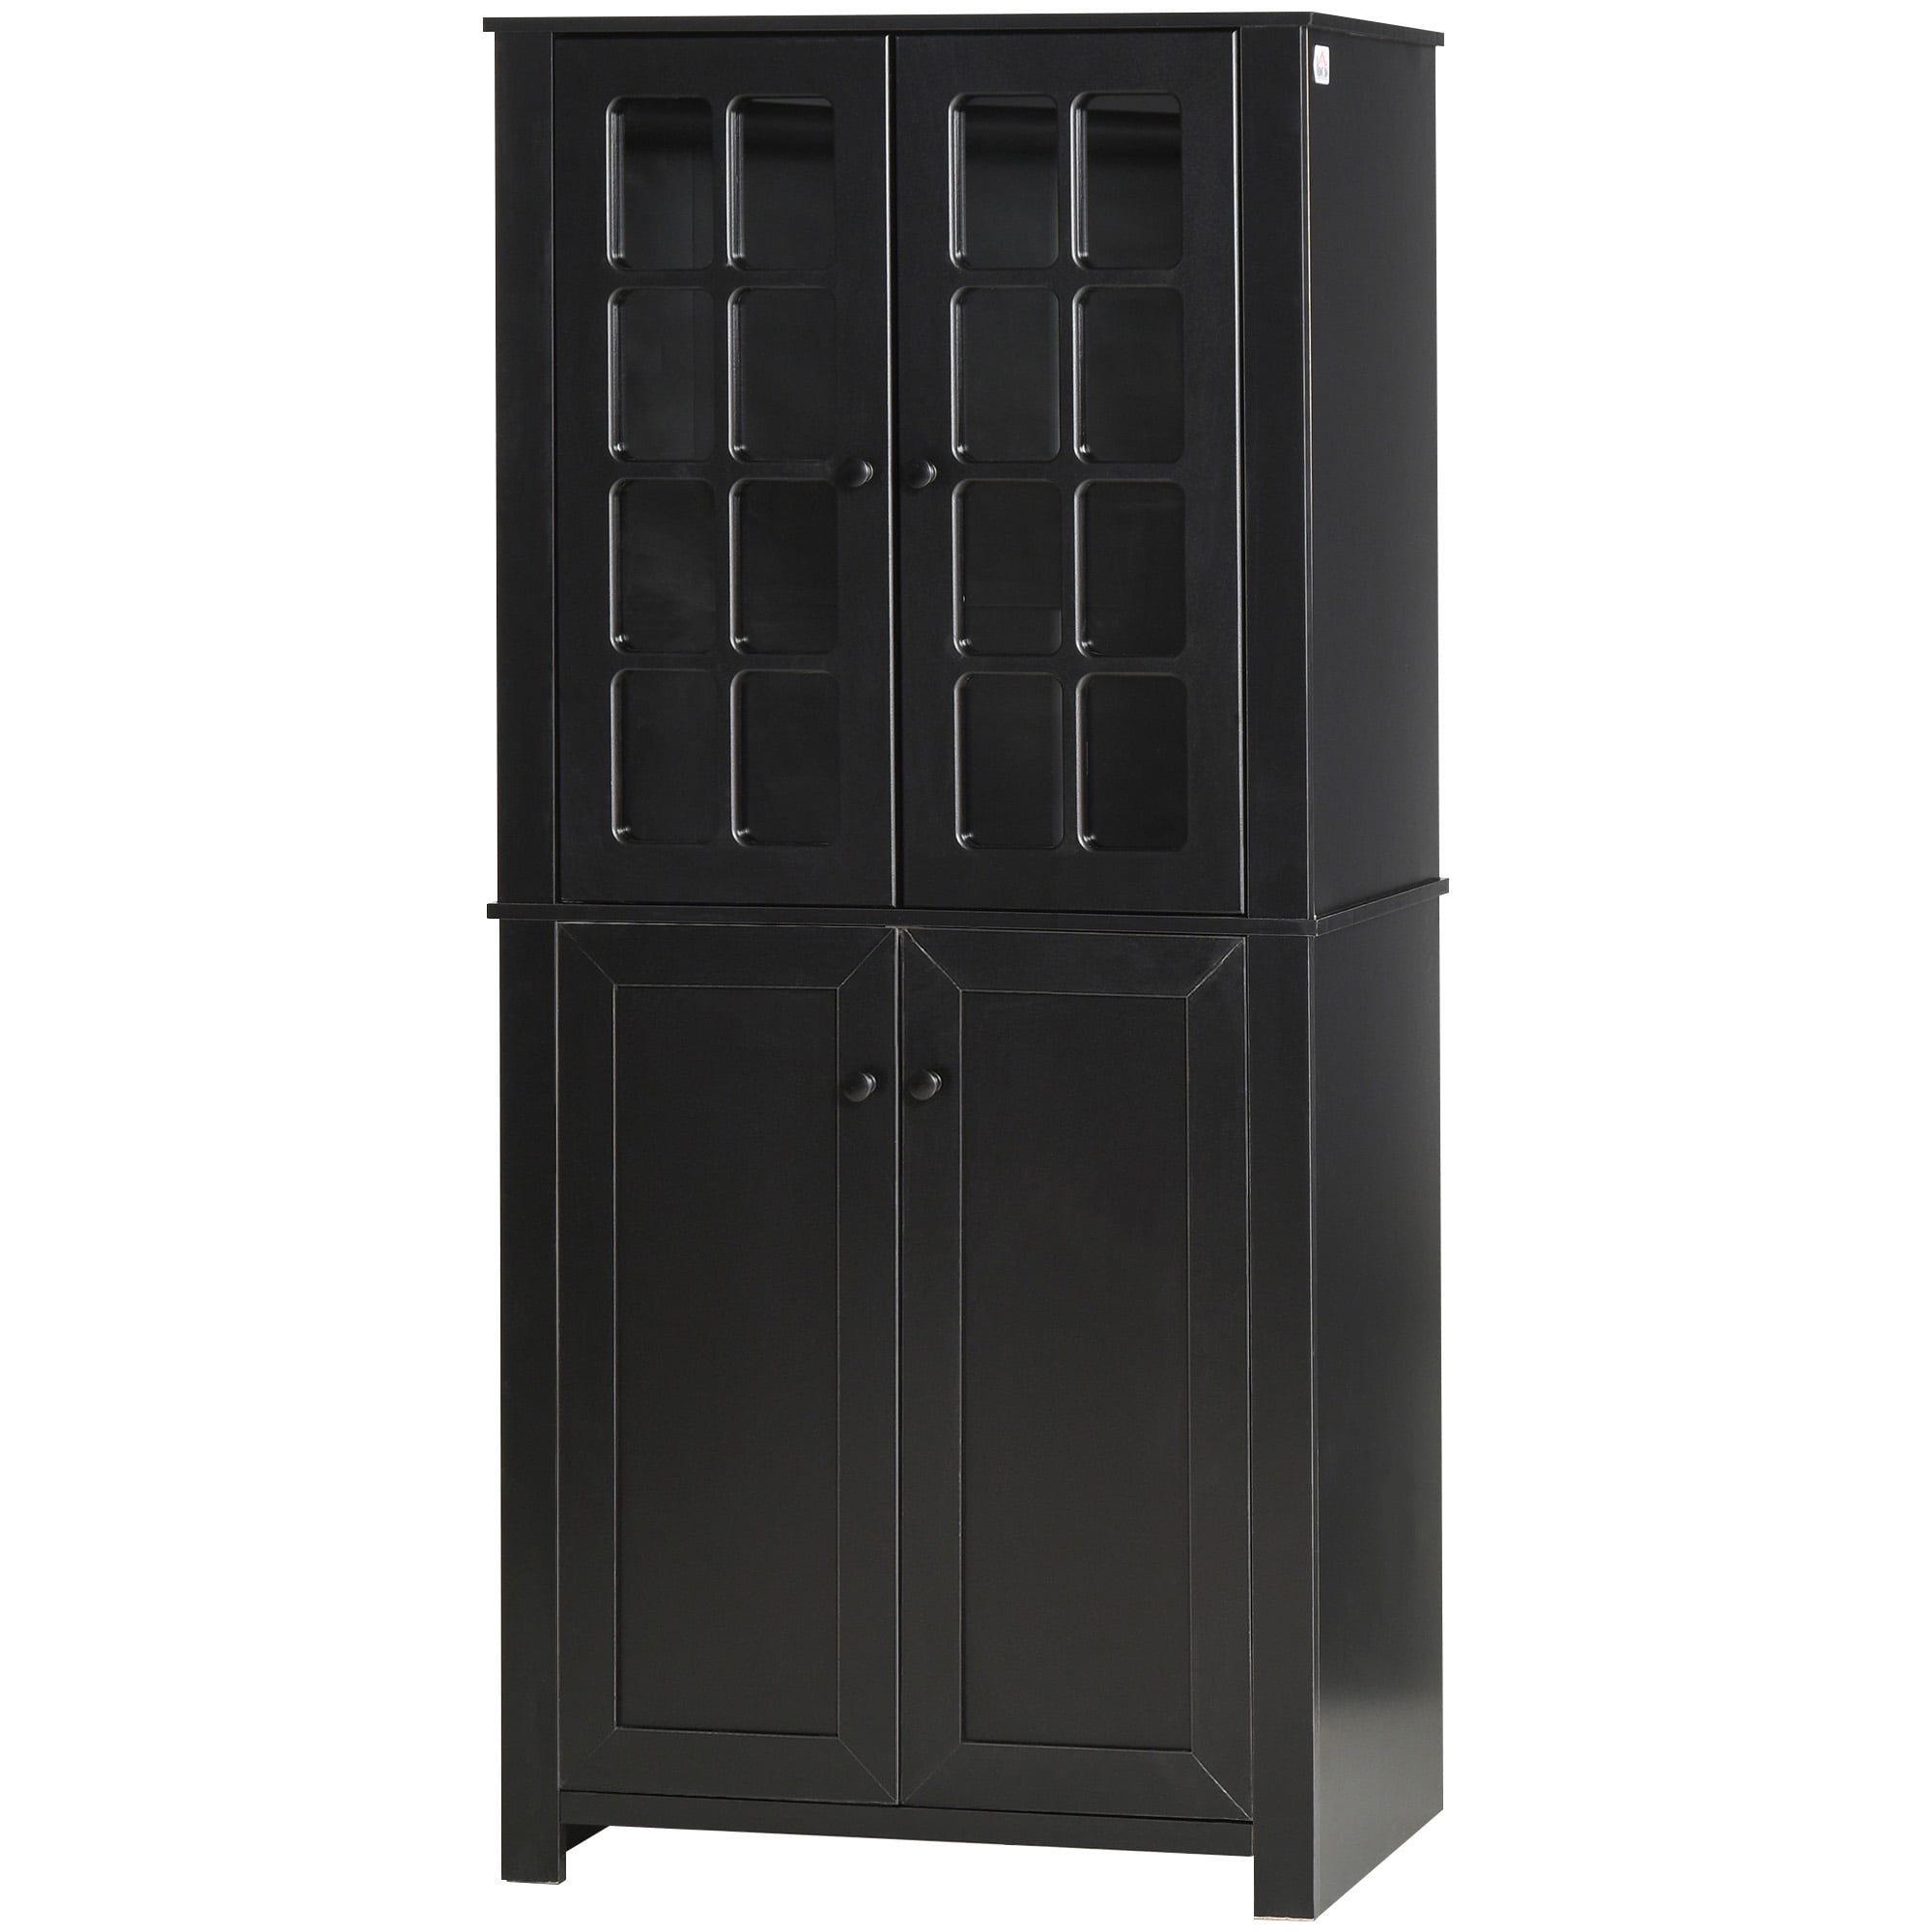 HOMCOM Contemporary Kitchen Pantry Freestanding Storage Cabinet Cupboard with Framed Glass Doors and Shelves Natural Wood Grain